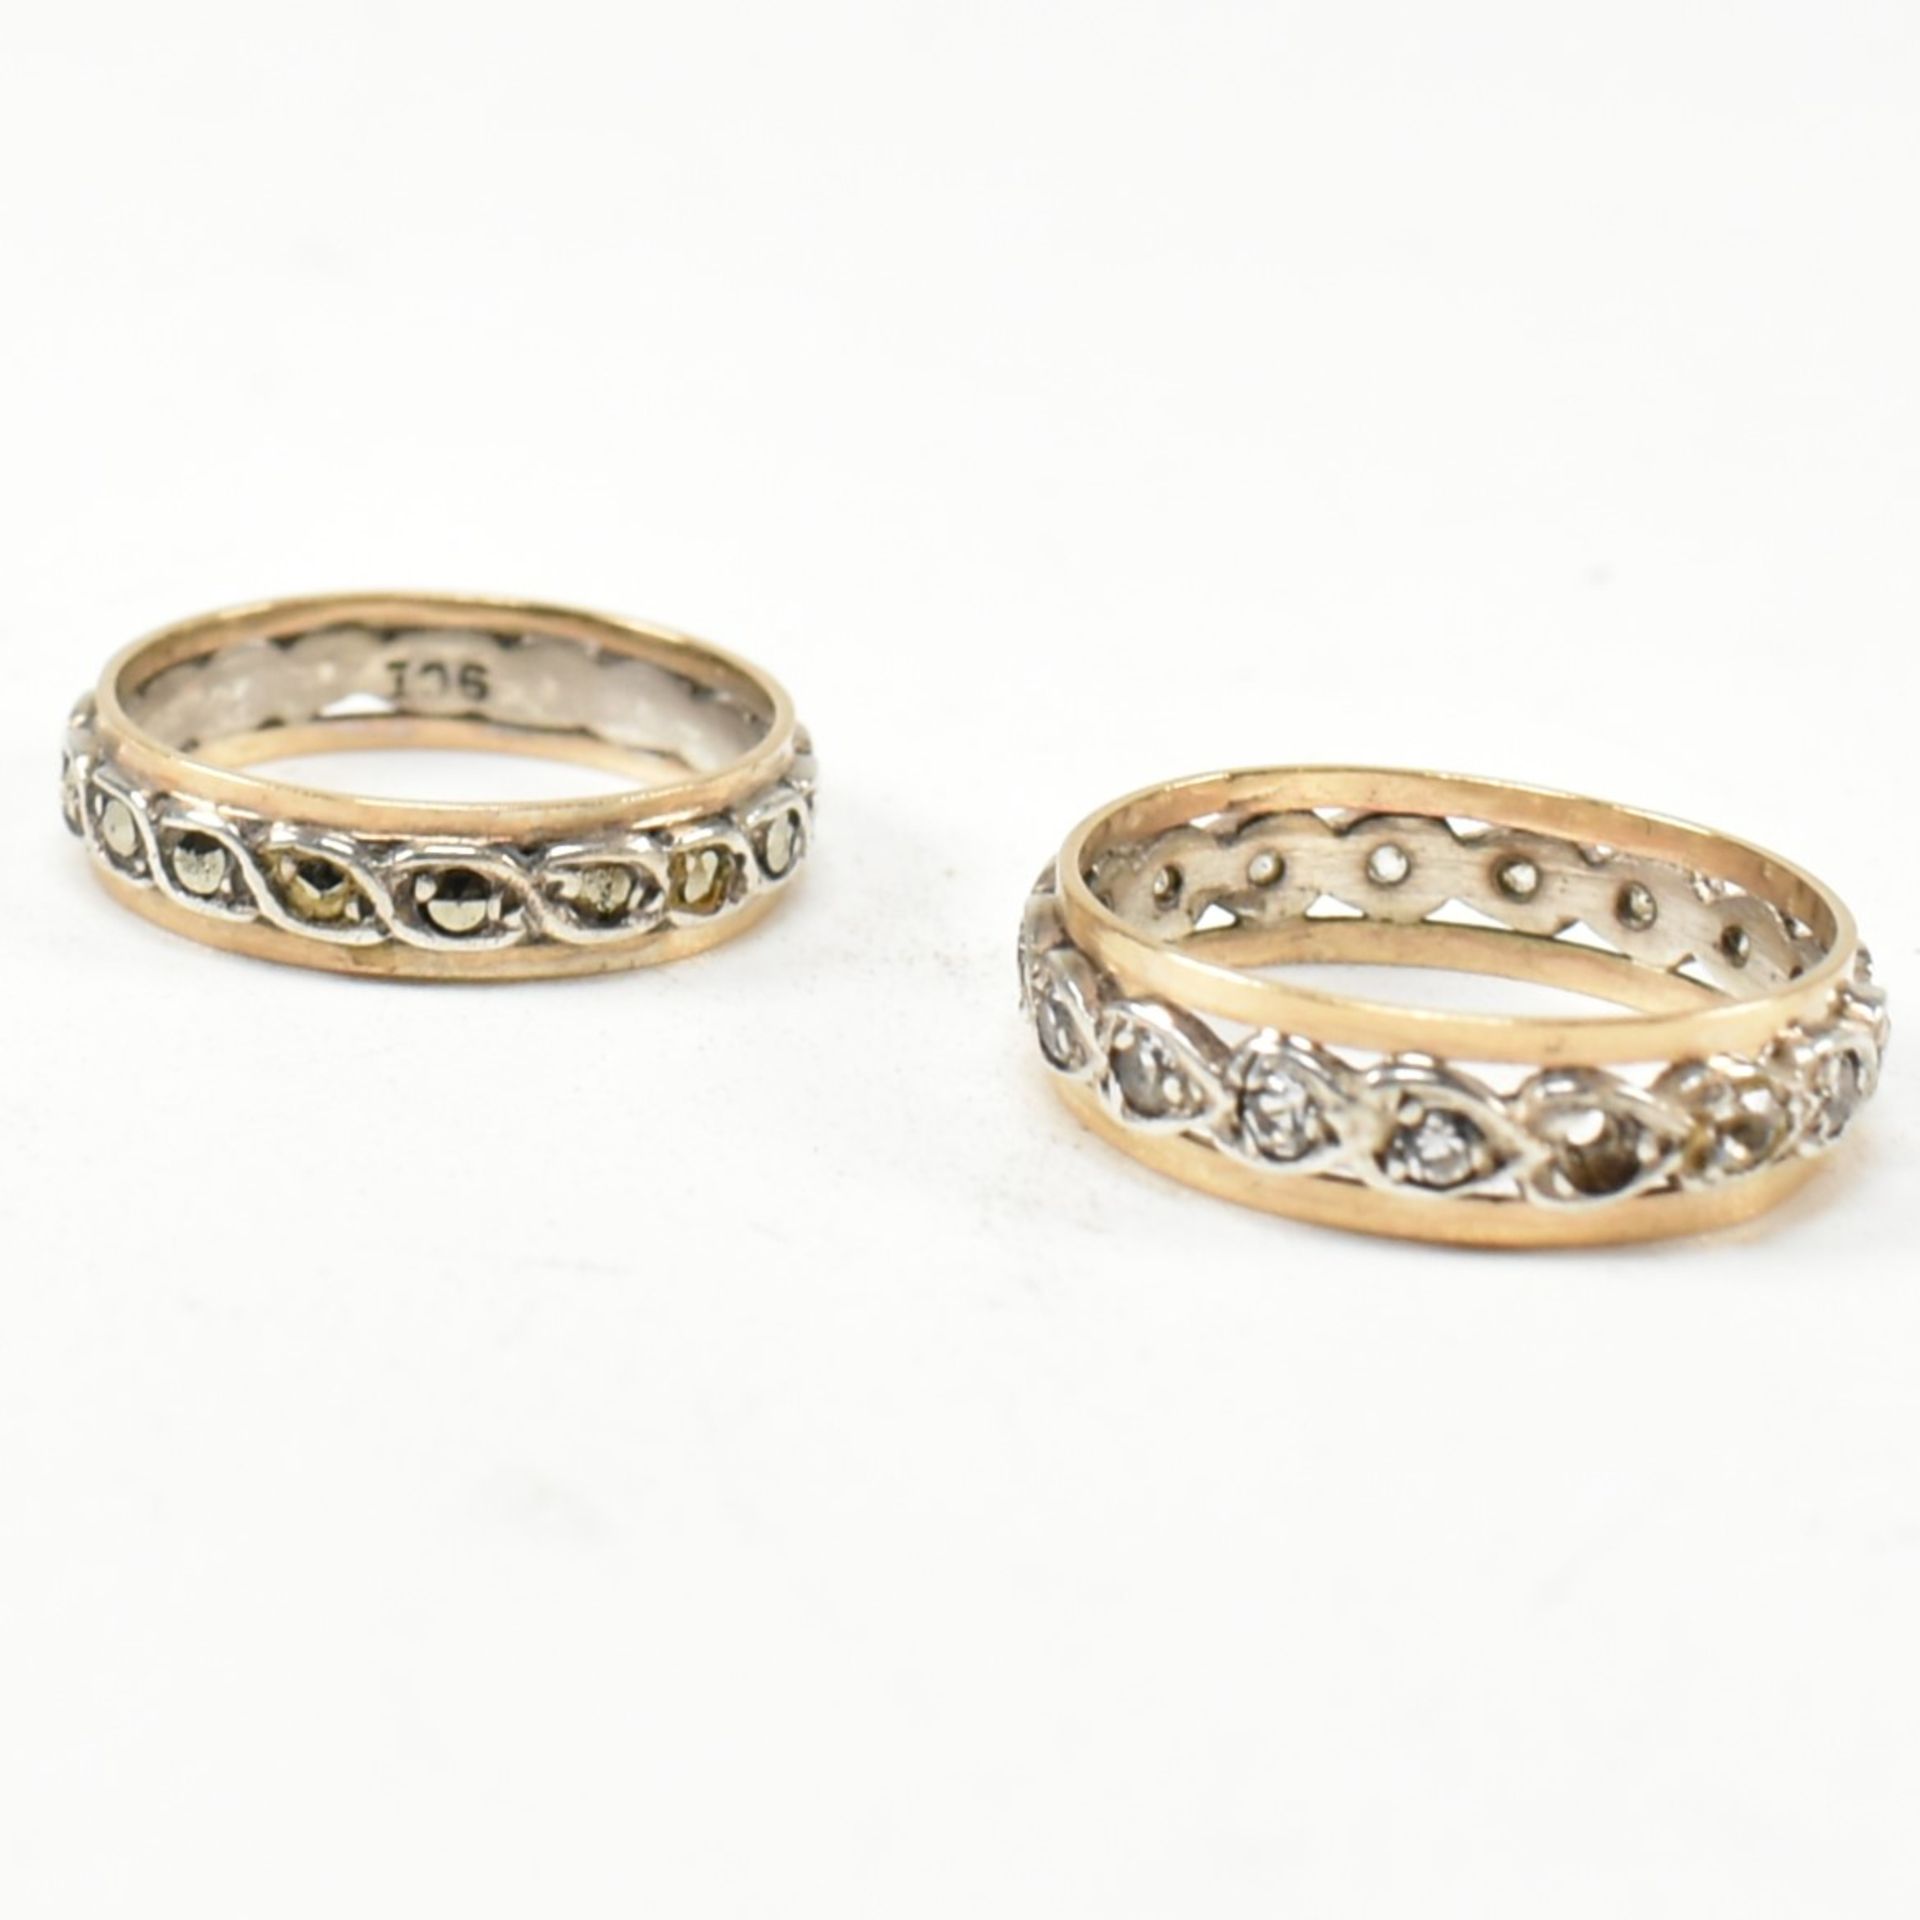 TWO 9CT GOLD & SILVER MARCASITE & WHITE STONE BAND RINGS - Image 2 of 5